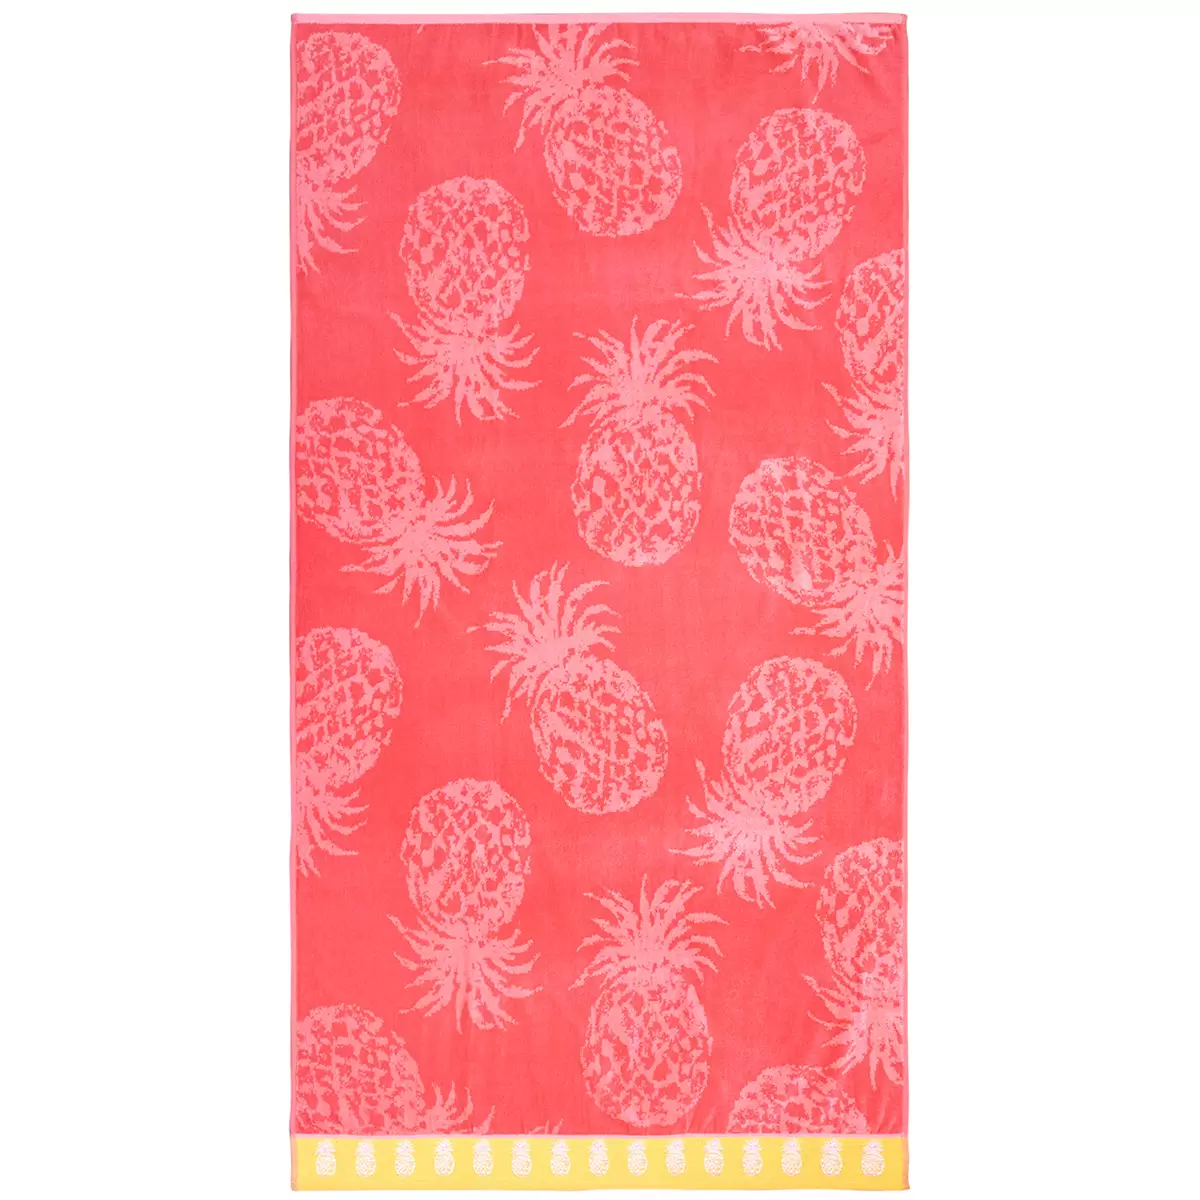 Tommy Bahama Printed Beach Towel Pineapple Passion